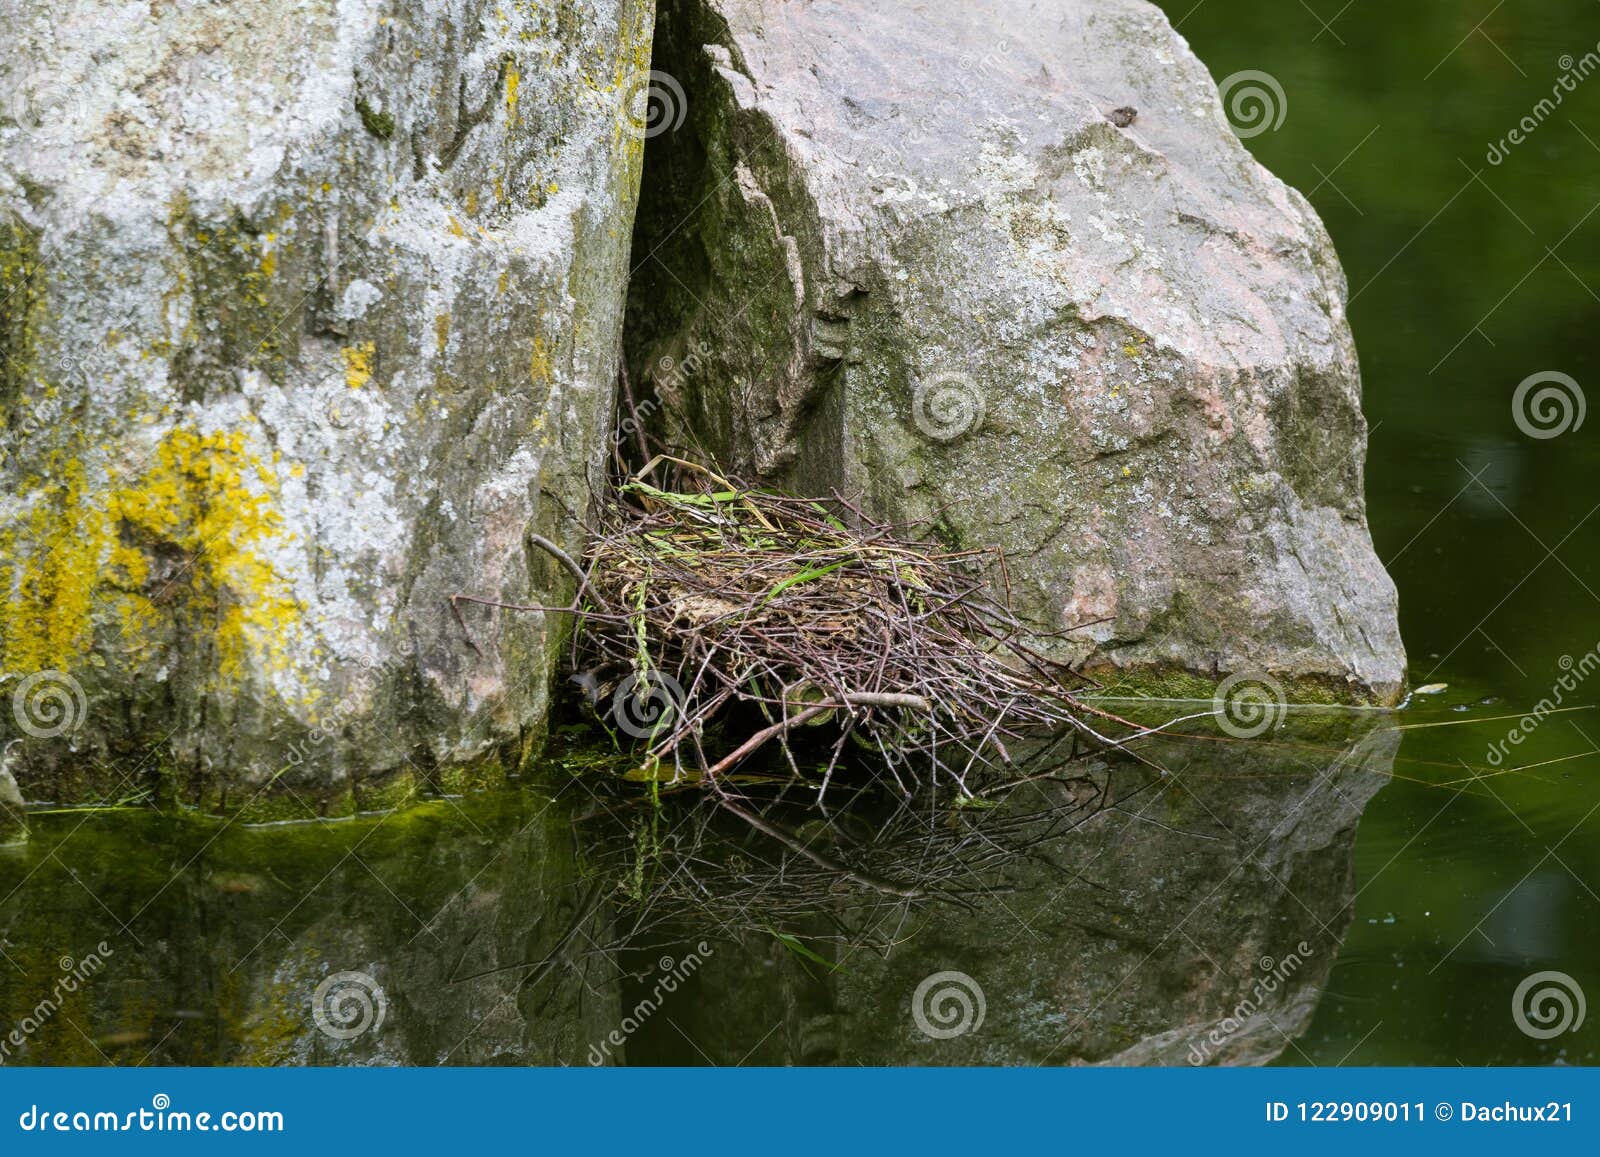 A Beautiful Scenery of a Waterside in Central London. Stock Image ...